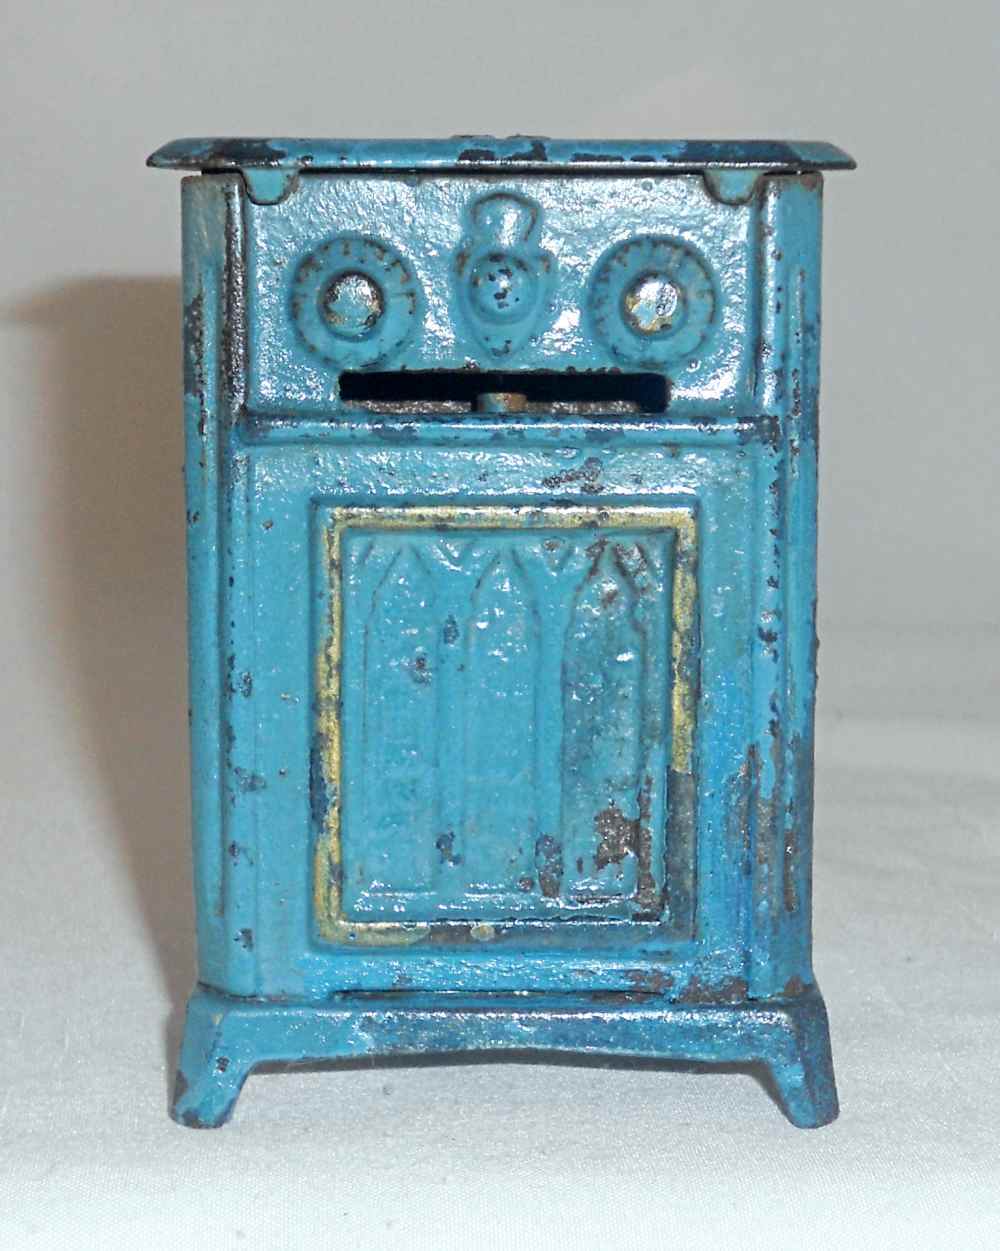 Primary image for Antique "Radio Bank" Blue Painted Hubley Cast Iron Still Penny Bank